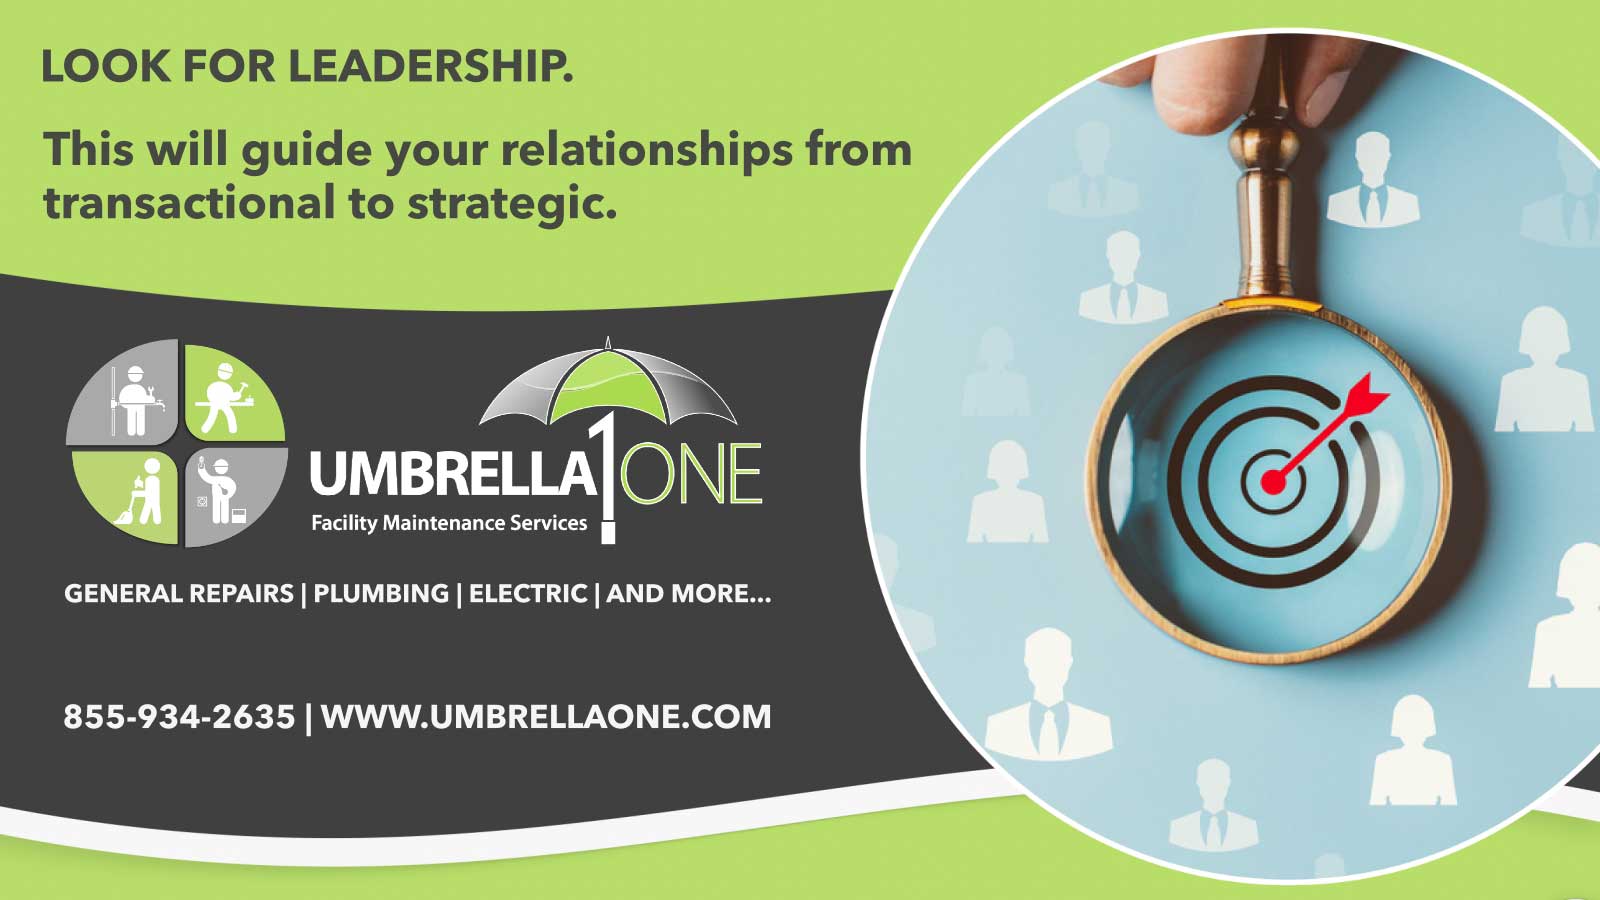 Look for leadership. This will guide your relationships from transactional to strategic